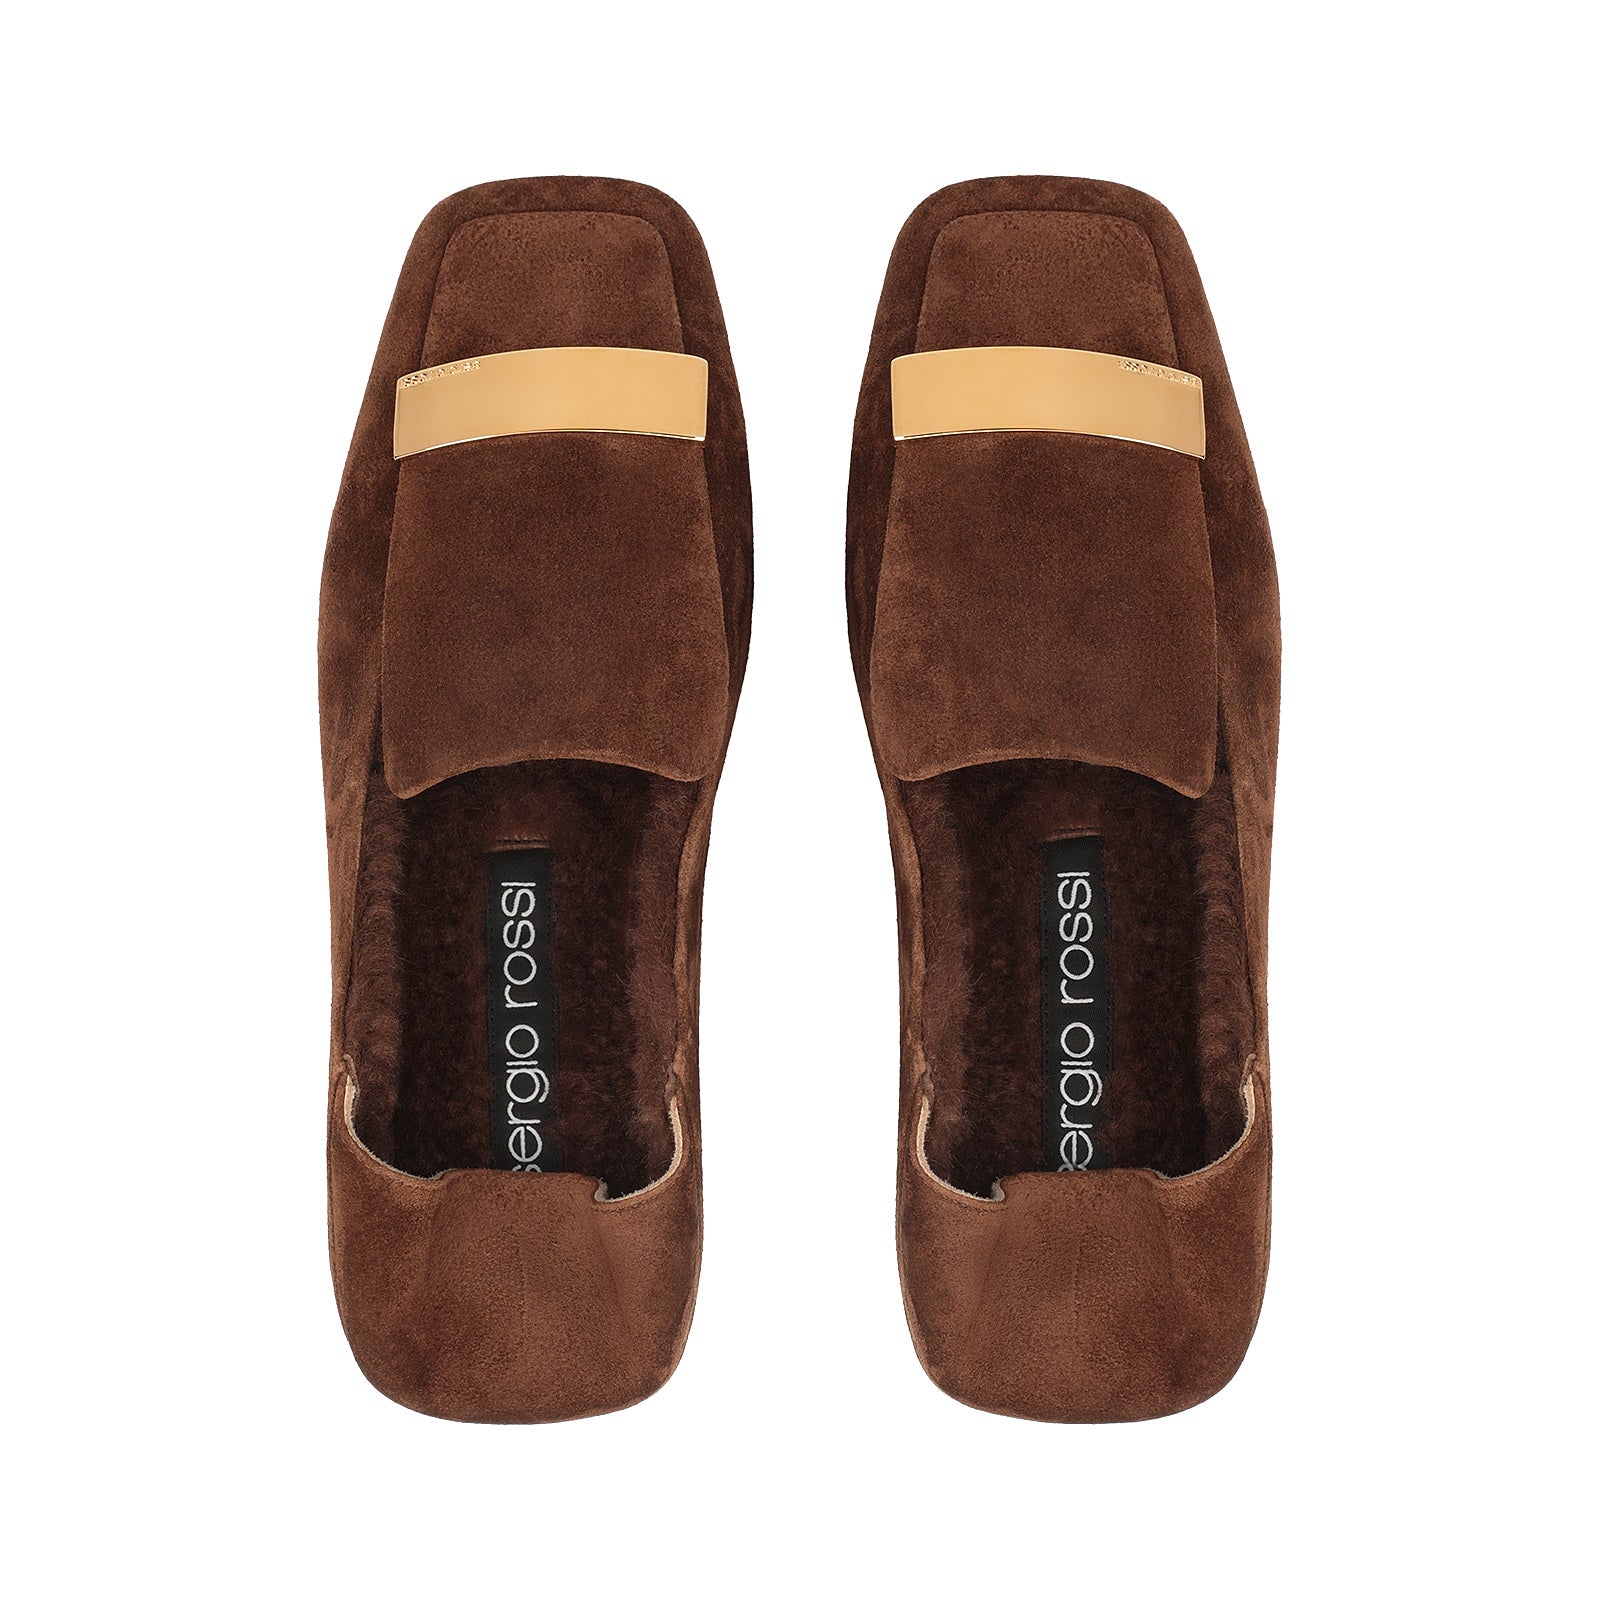 Suede Sr1 loafers - Cocoa